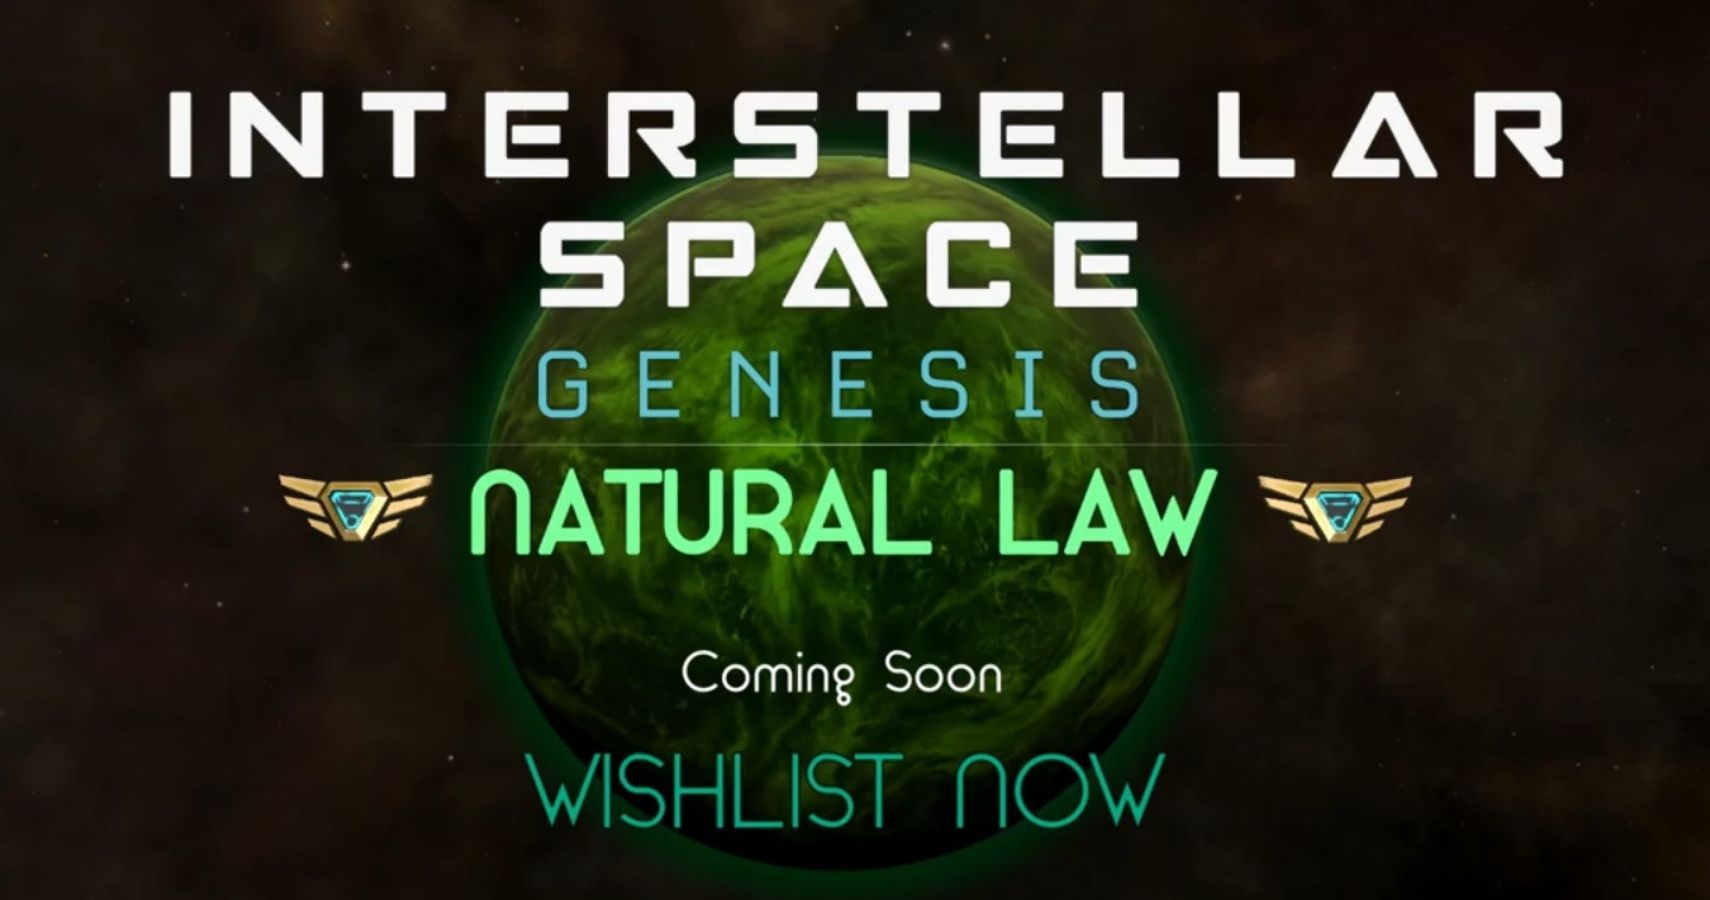 Interstellar Space Genesis Natural Law Expansion Announcement feature image